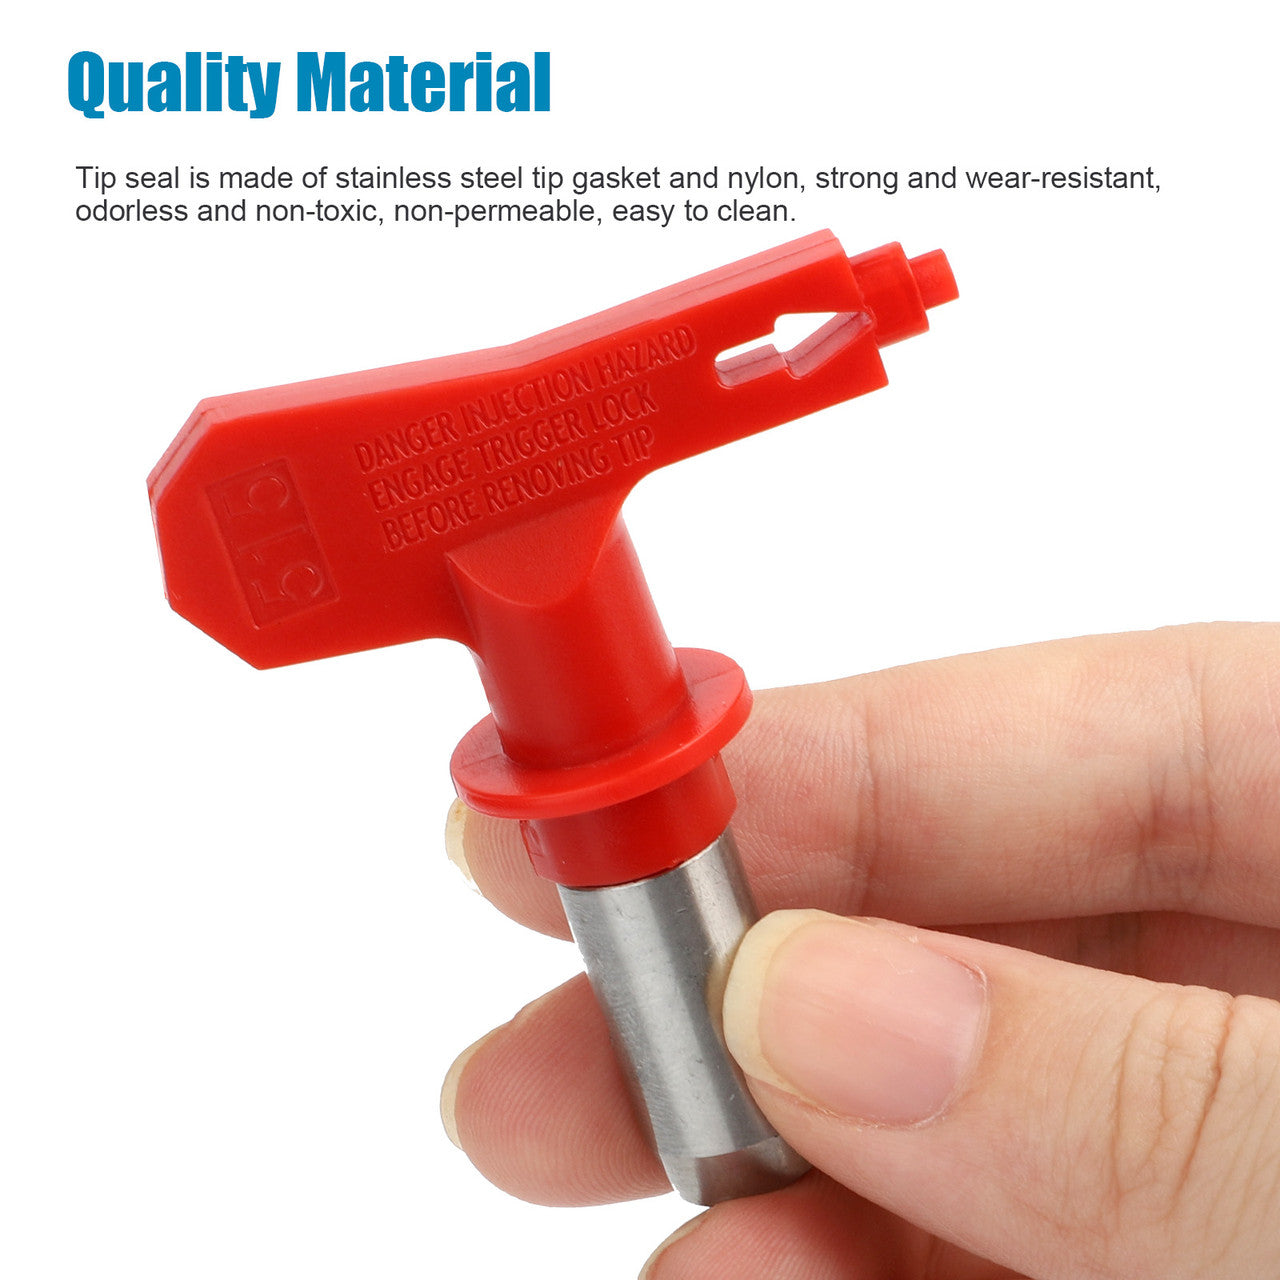 2pcs Airless Paint Spray Gun Tip Nozzle Red 515